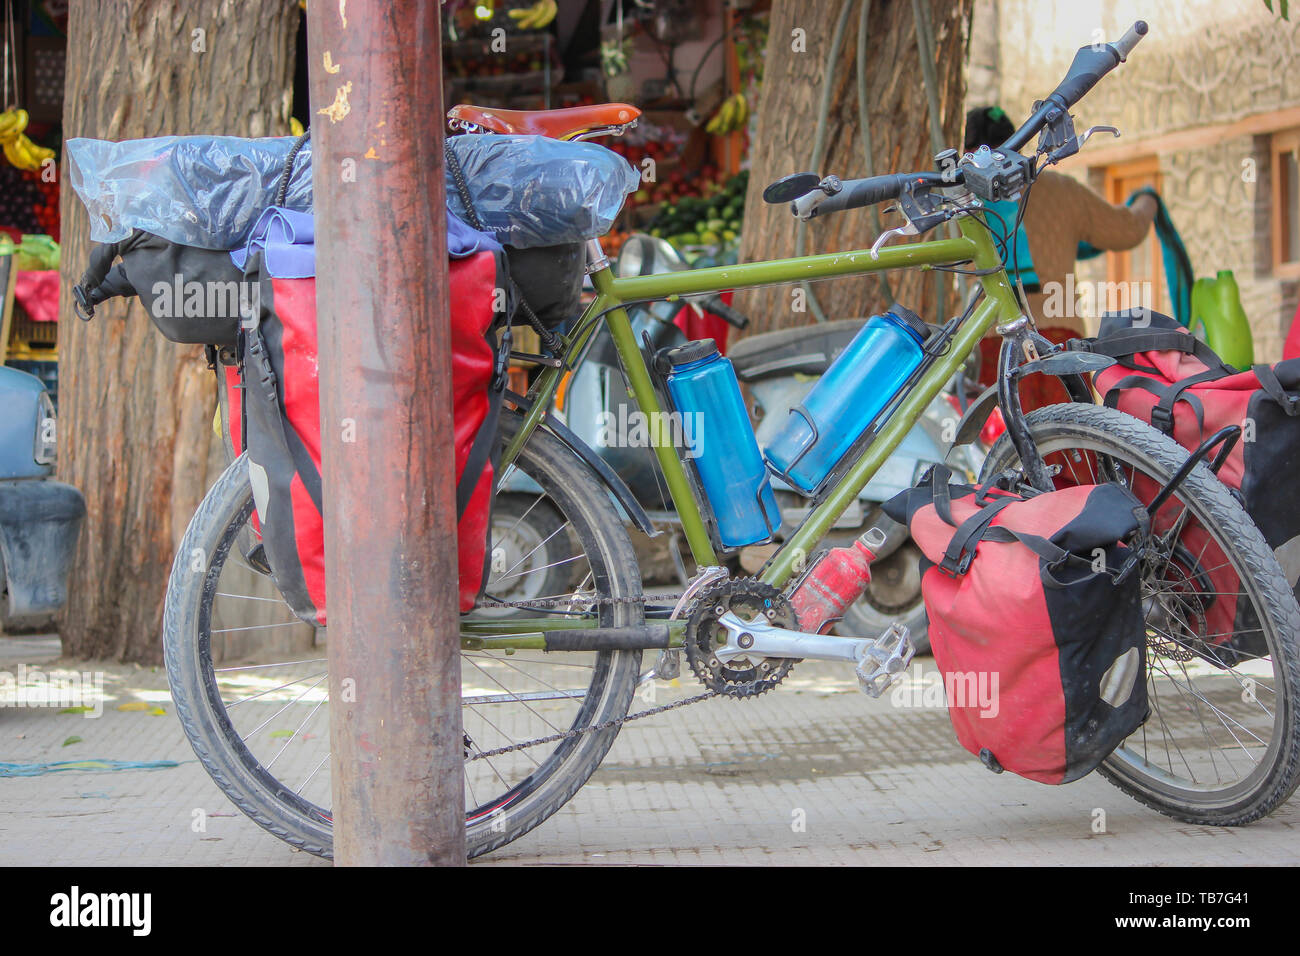 Ladakh, India: Dated- May 9, 2019: A mountain bike with bags and luggage parked at a market in Ladakh. Cycling in Ladakh. Mountain Biking in Ladakh Stock Photo